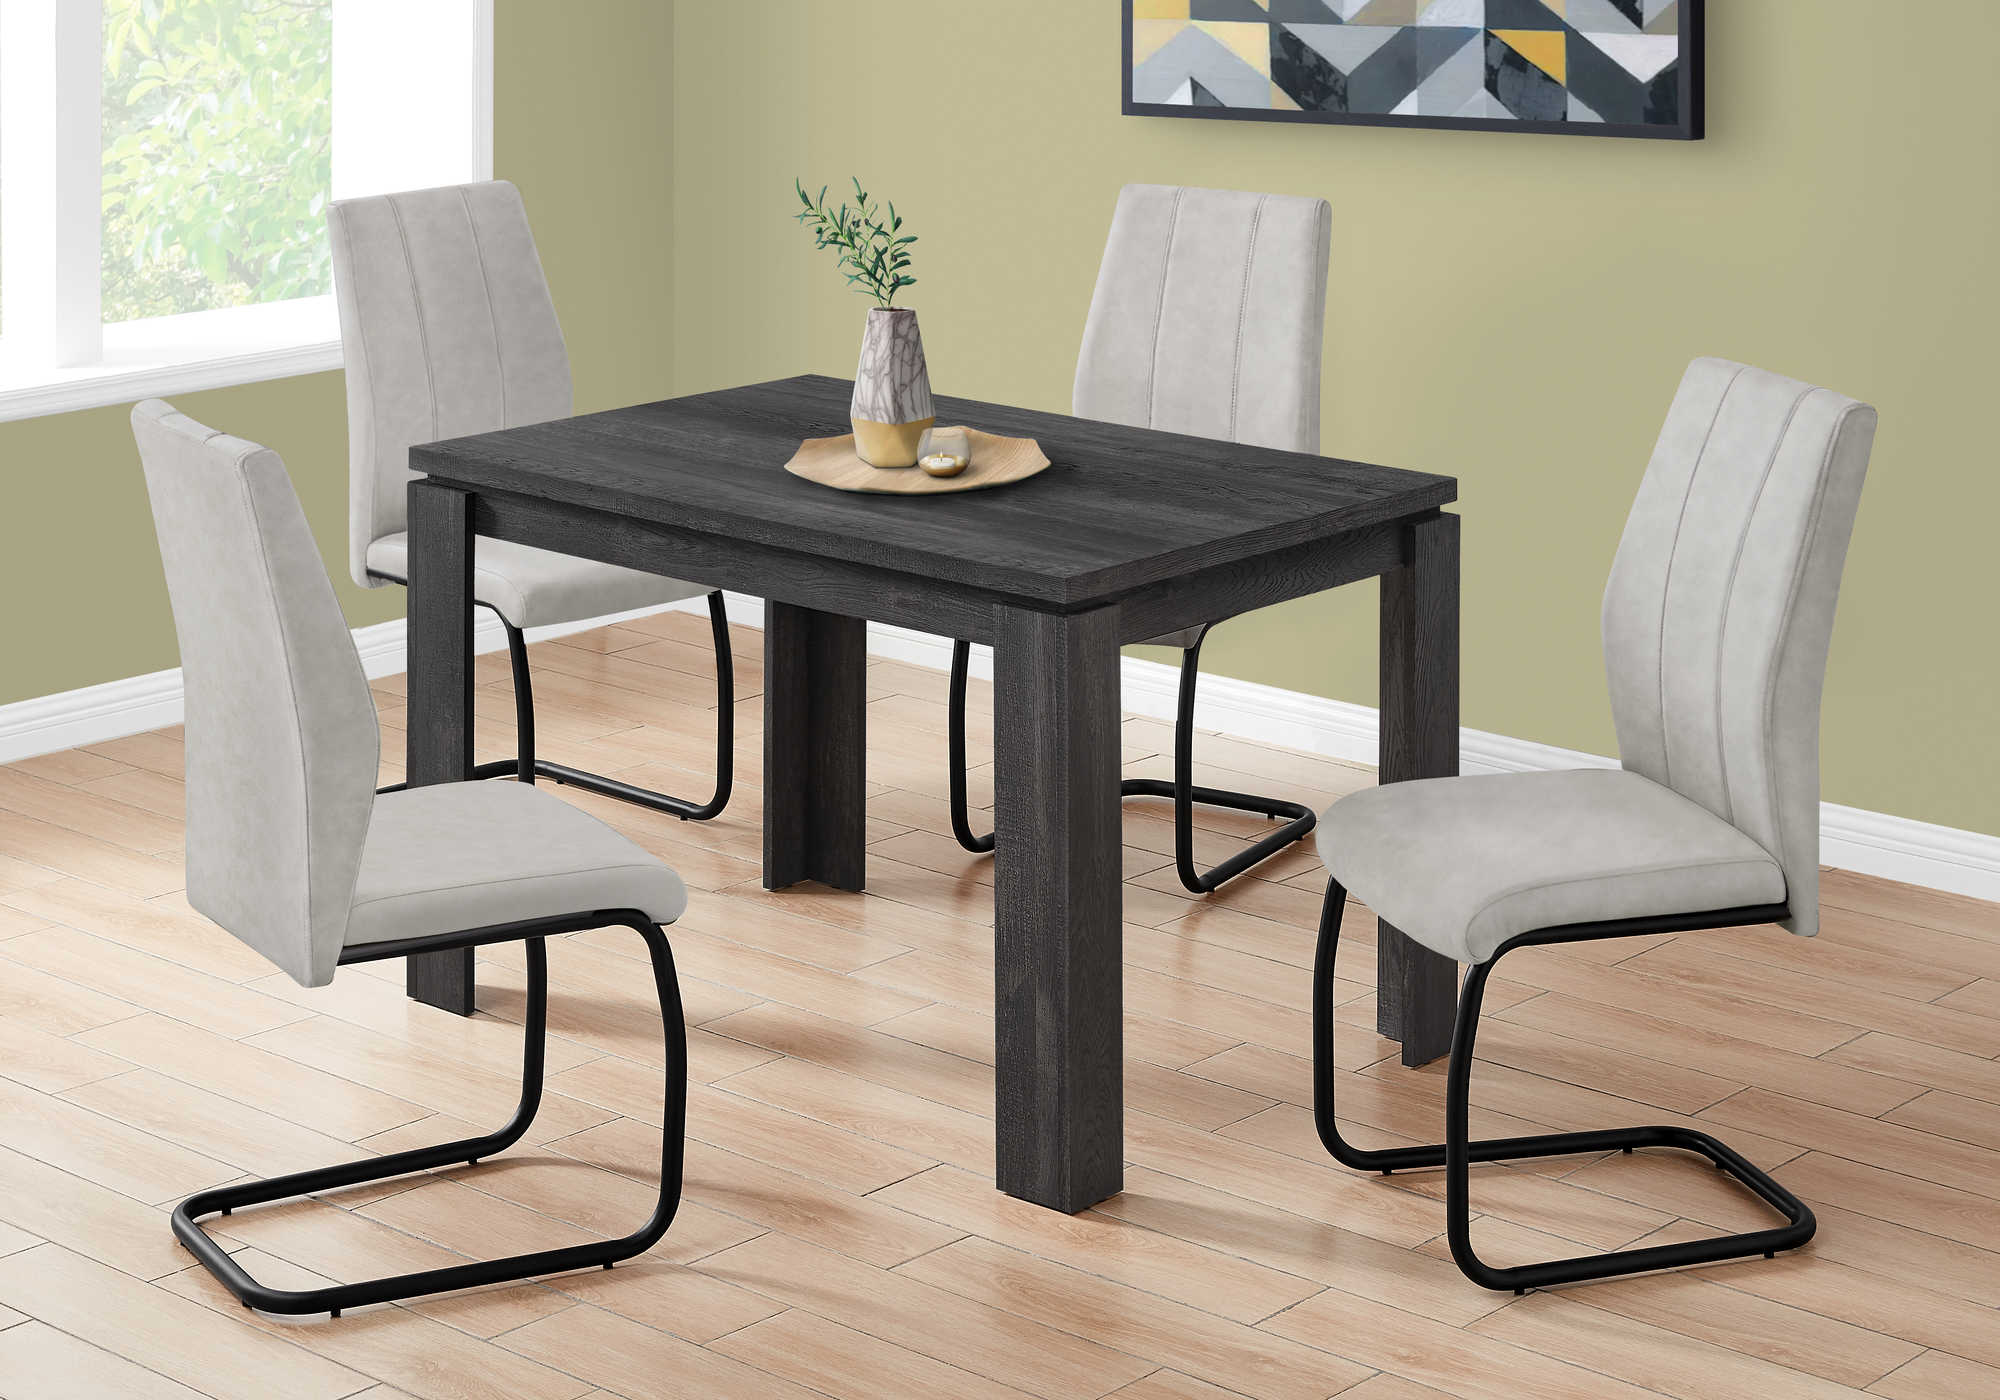 DINING TABLE - 32"X 48" / BLACK RECLAIMED WOOD-LOOK